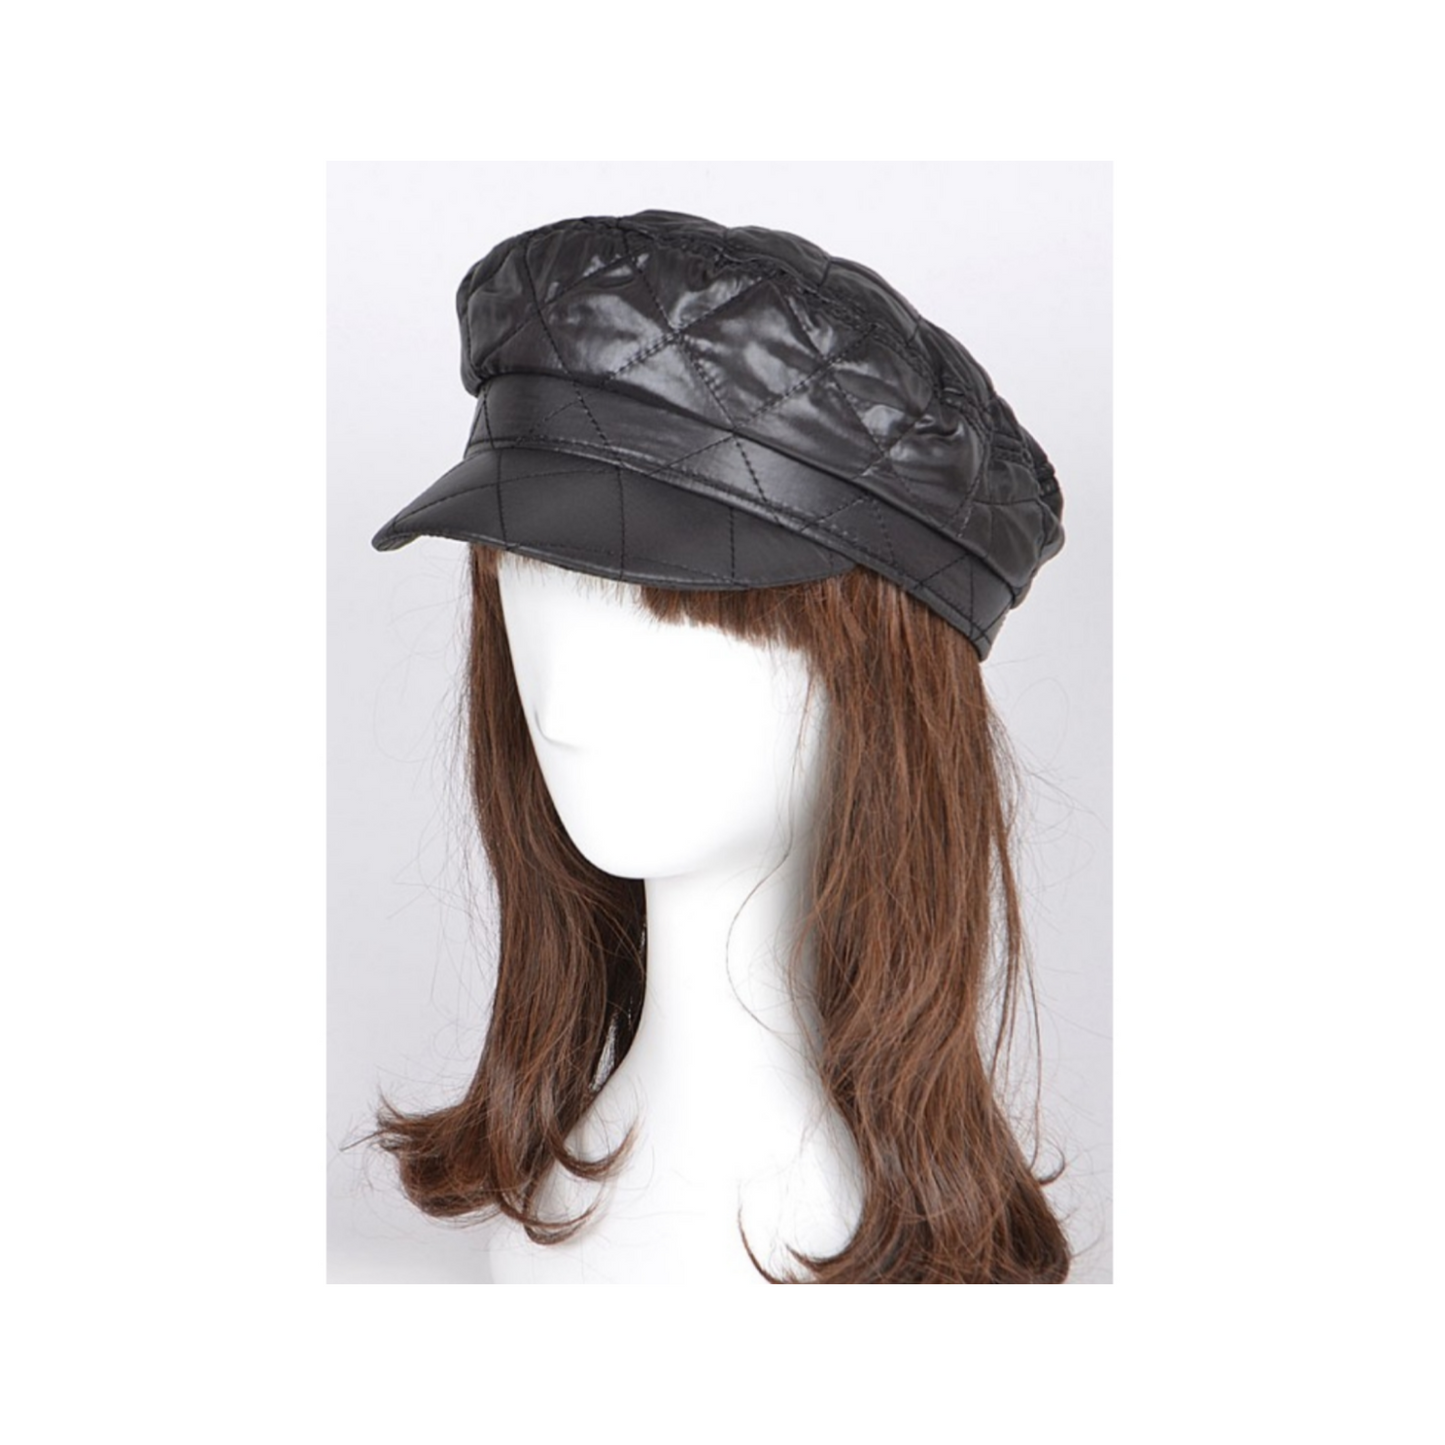 *PREORDER* (Ships by 10/16) Tess Faux Leather Cap